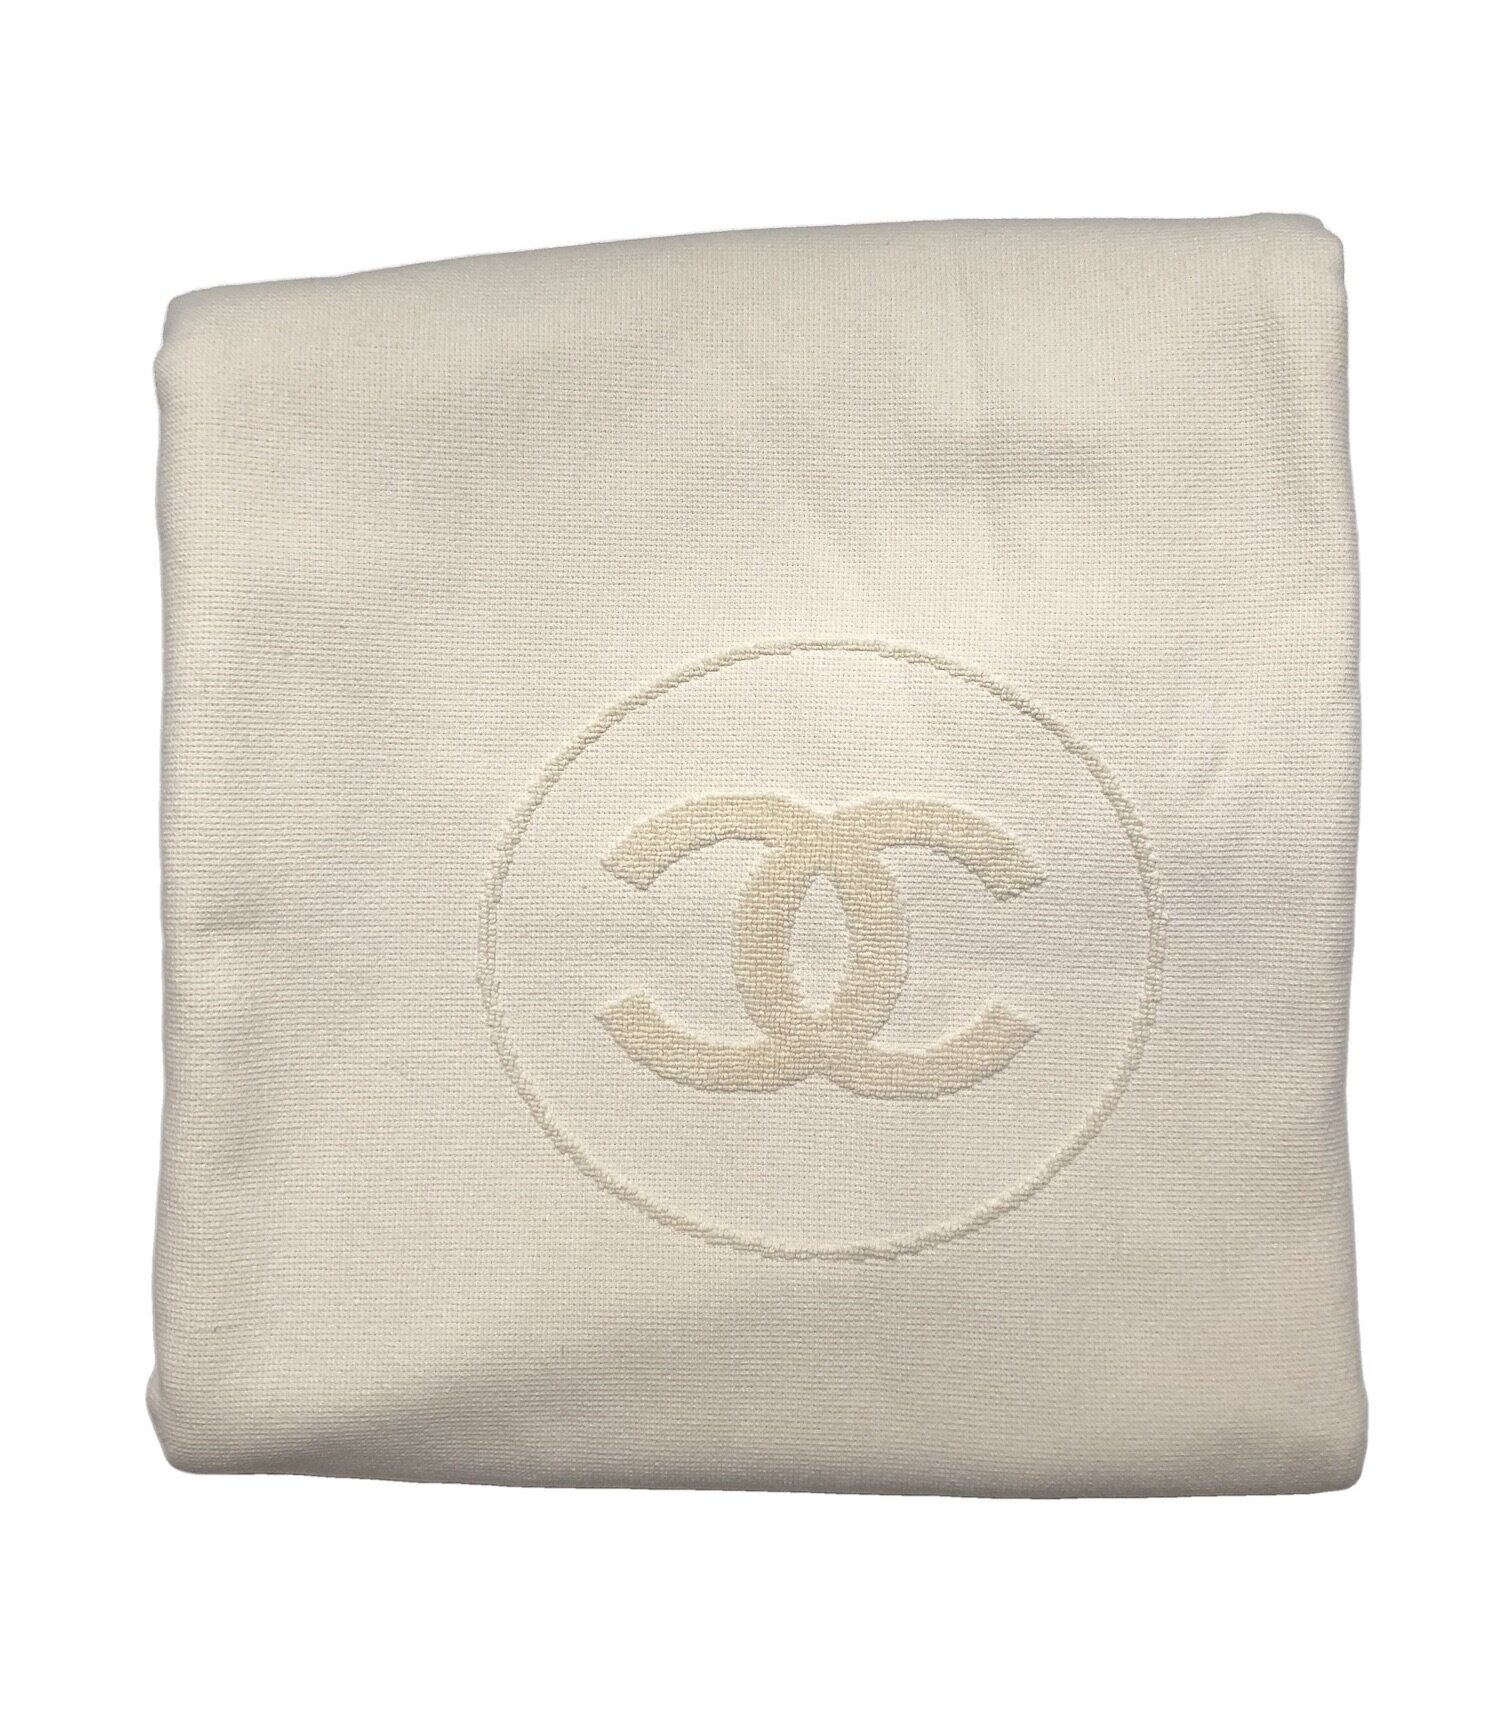 Get the best deals on CHANEL Beach In Bath Towels & Washcloths when you  shop the largest online selection at . Free shipping on many items, Browse your favorite brands